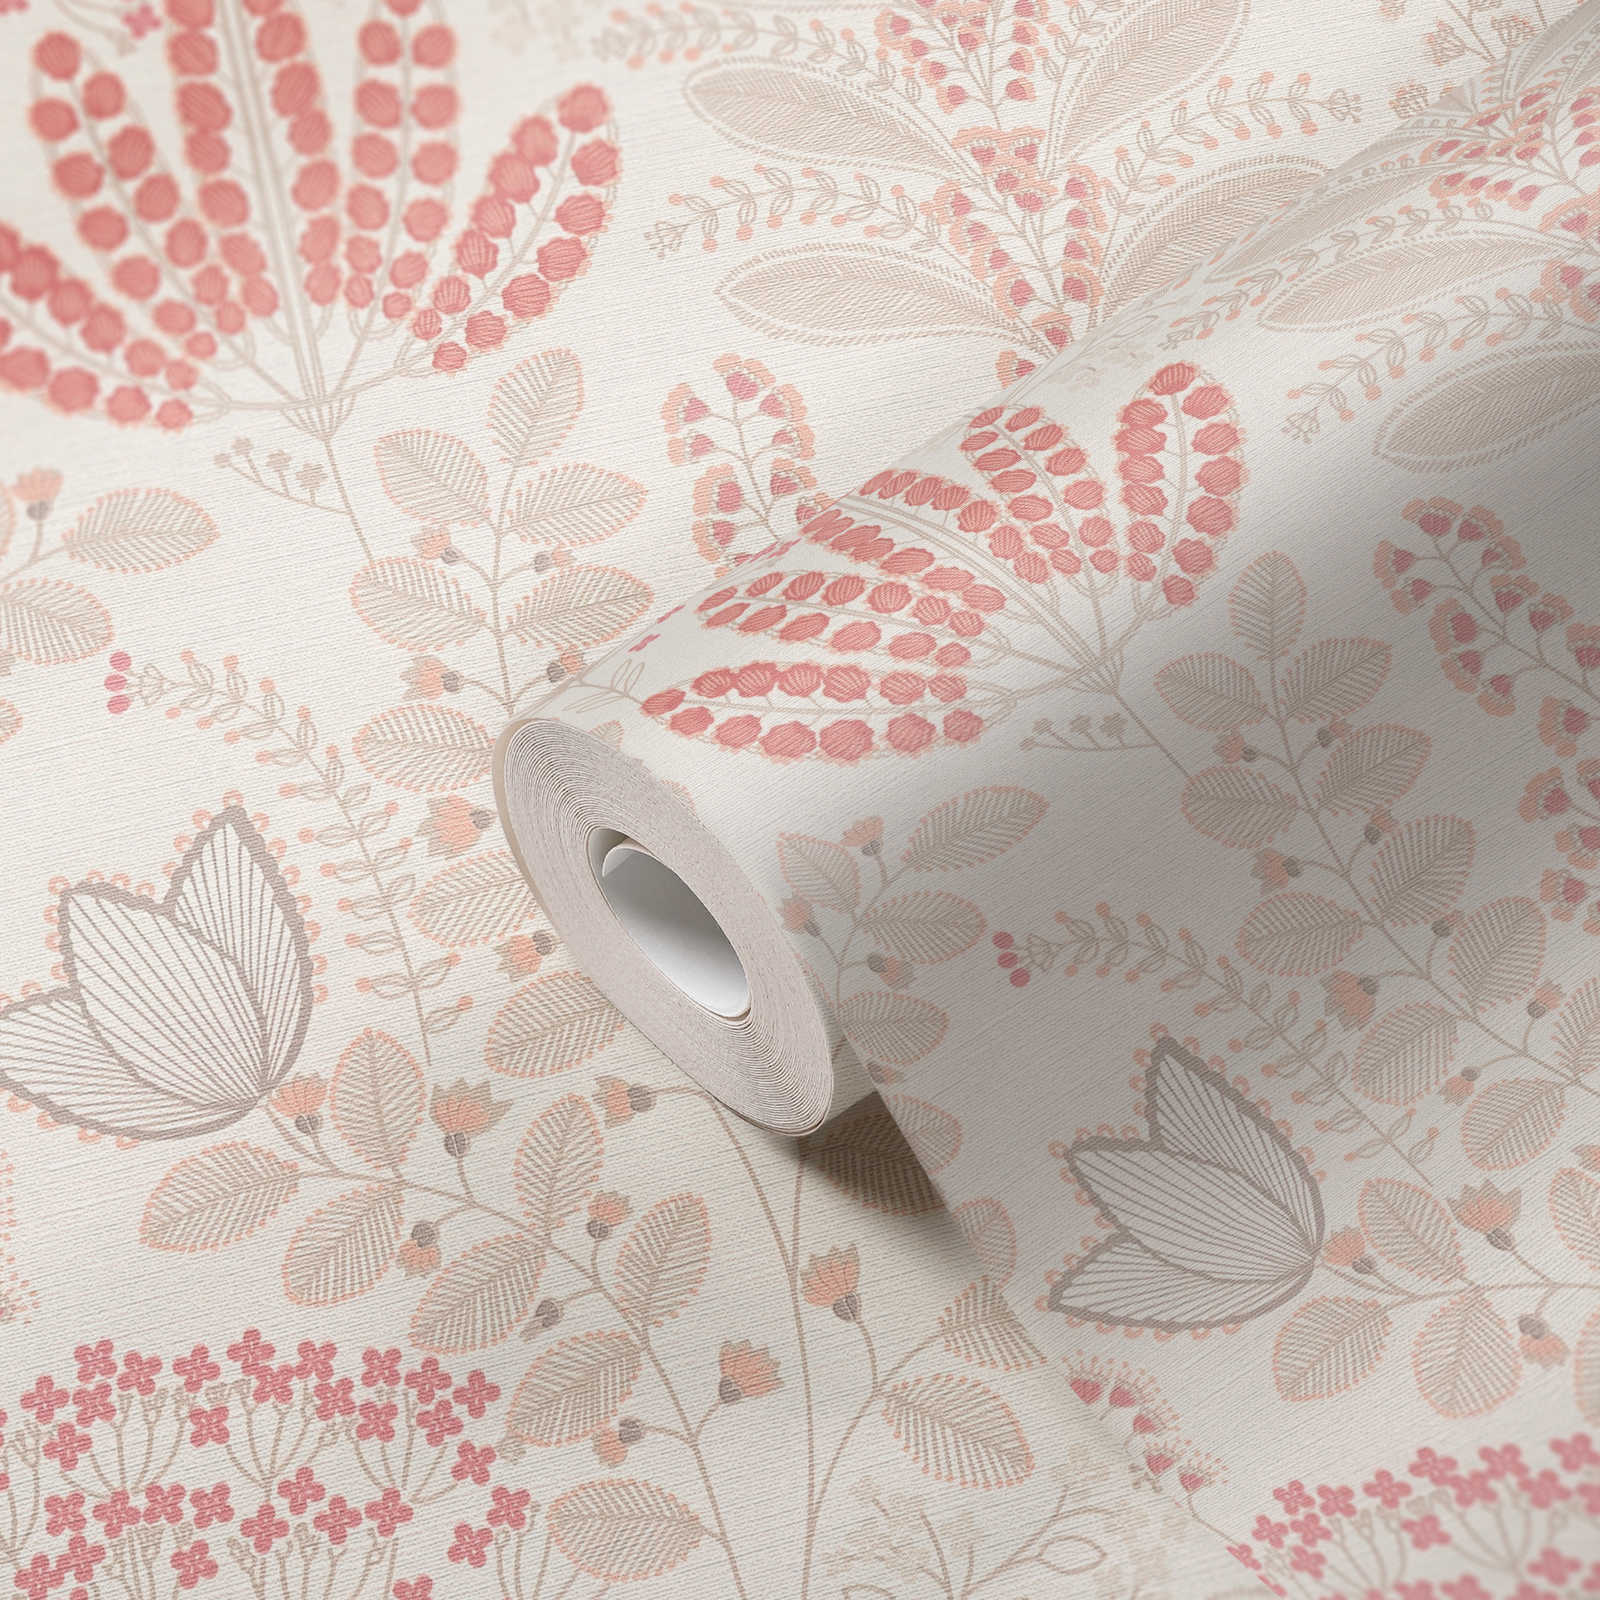             Floral wallpaper with leaves in retro design lightly textured, matt - white, taupe, pink
        